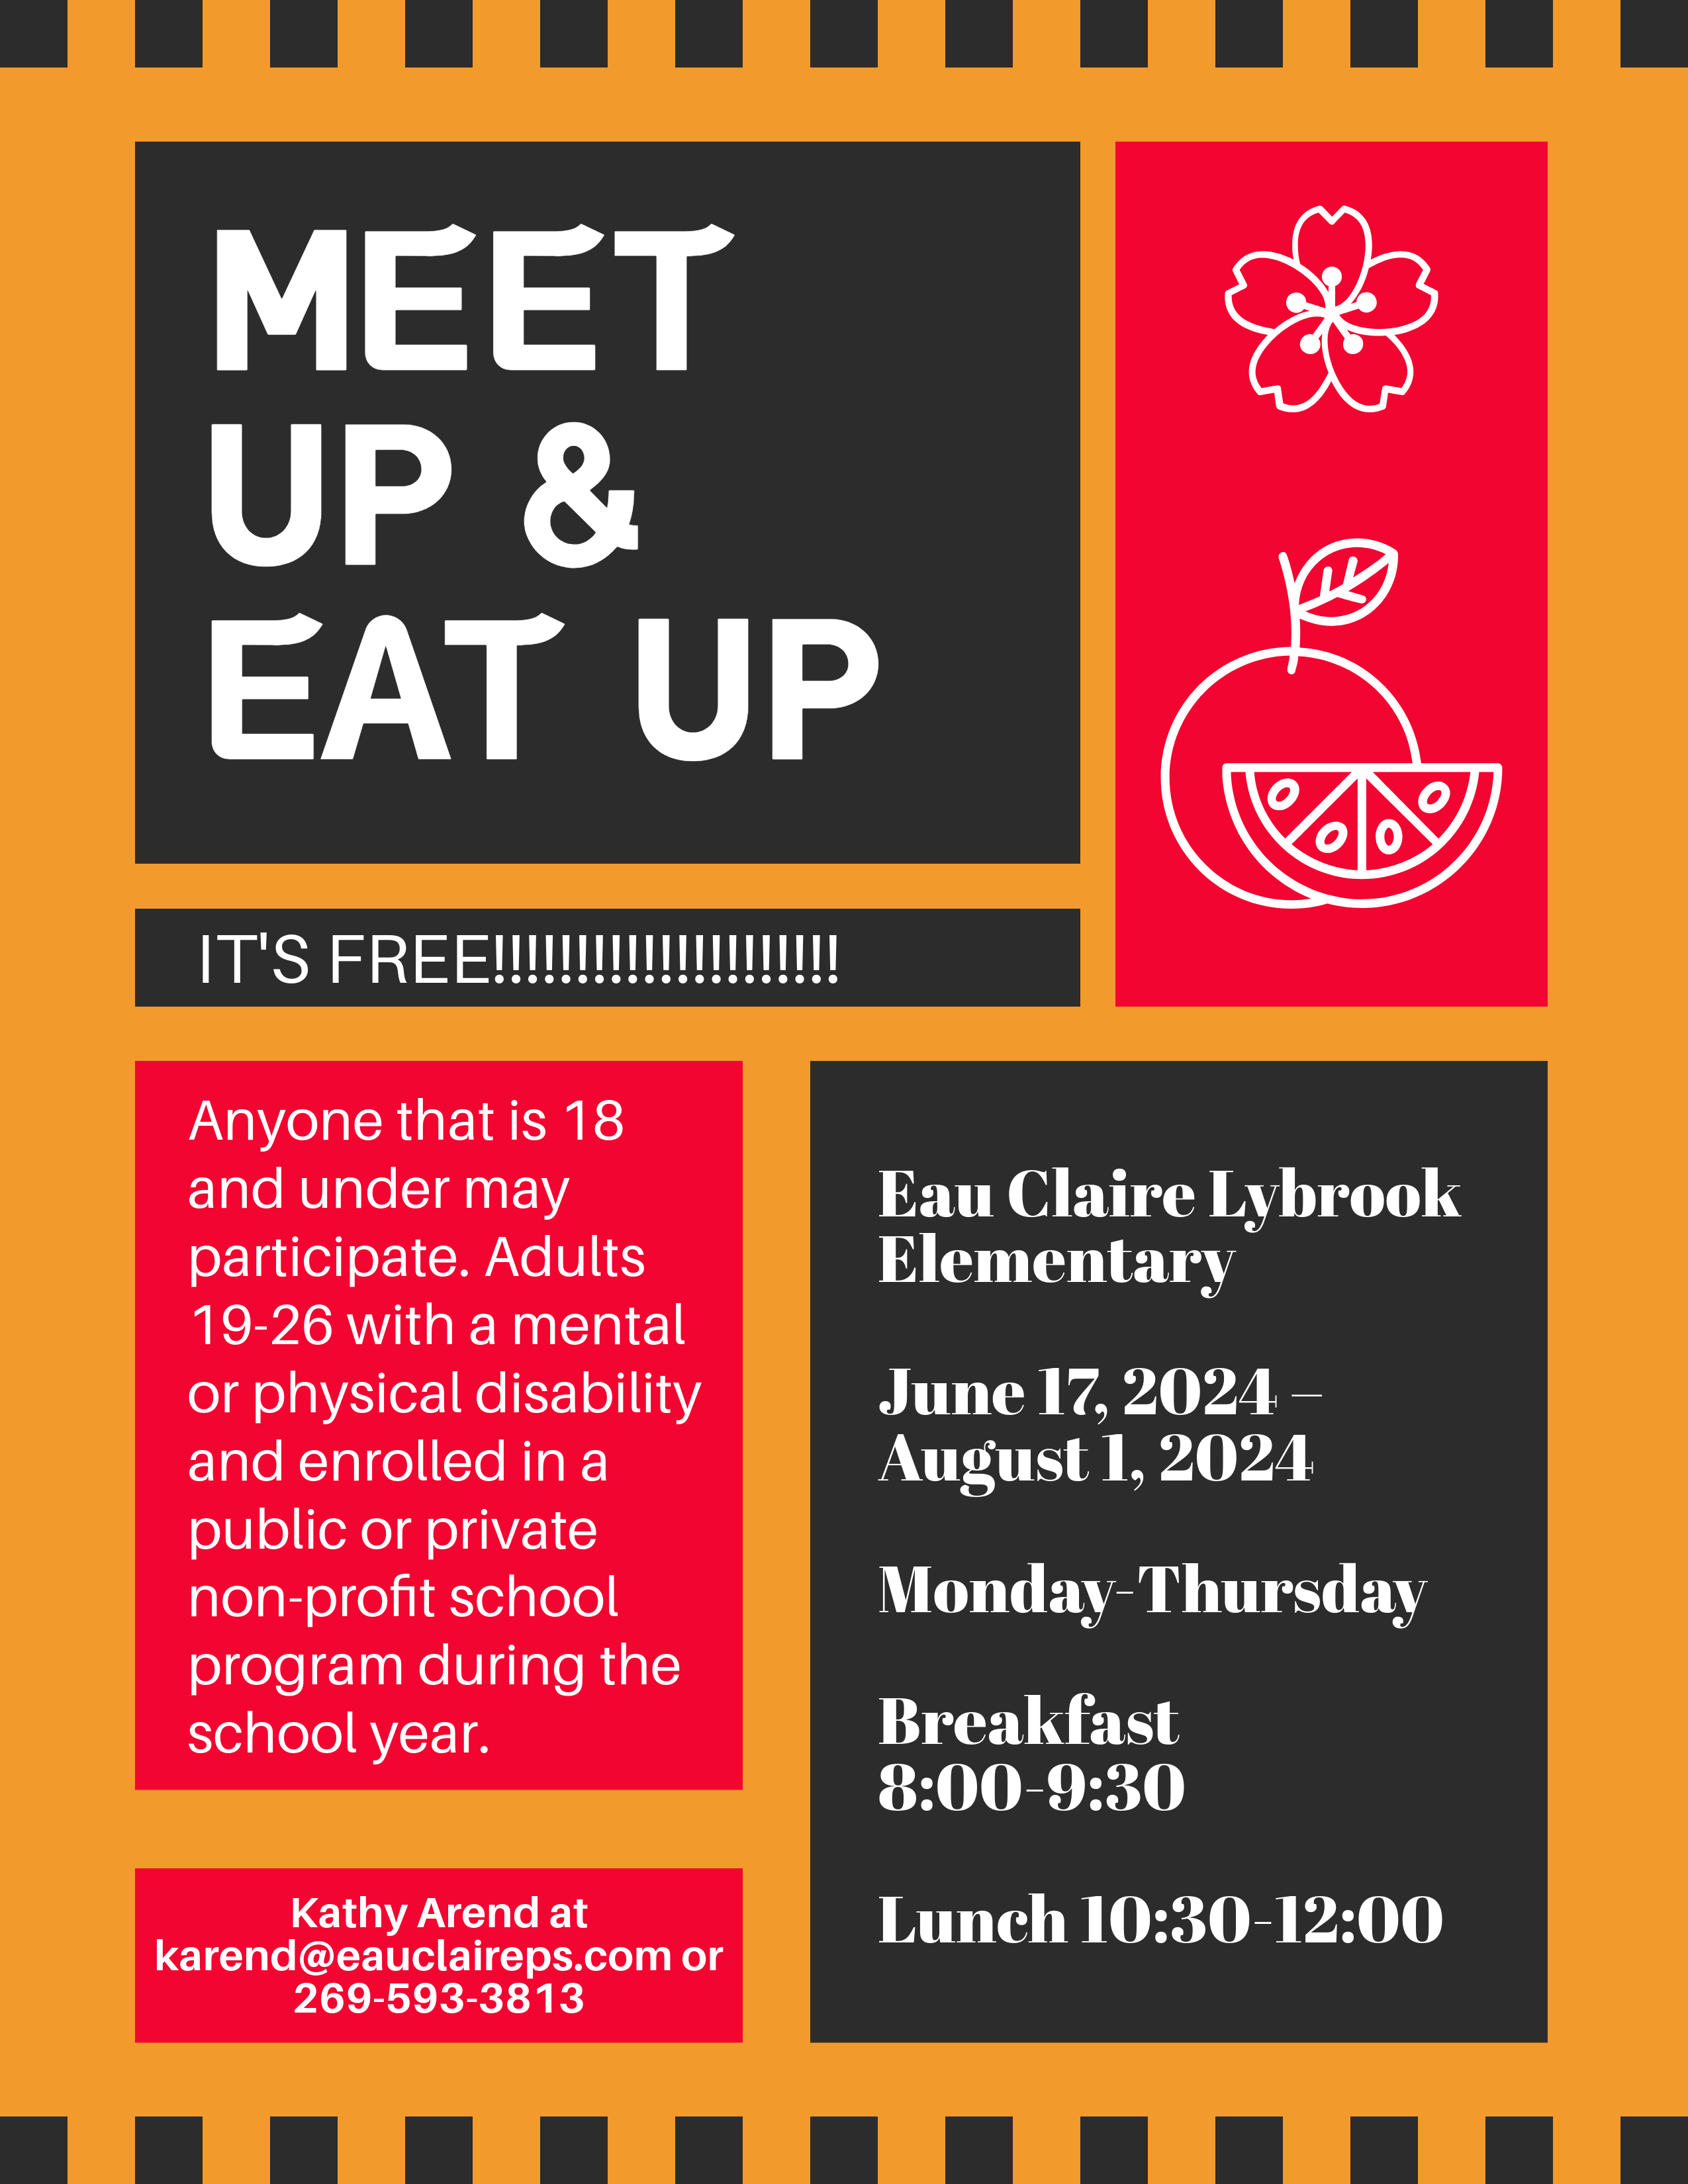 Meet up and Eat up! It's Free!!! Eau Claire Lybrook Elementary from June 17, 2024 - august 1, 2024 Monday - Thursday. Breakfast 8:00-9:30. Lunch 10:30-12:00. Anyone that is 18 and under may participate. Adults 19-26 with a mental or physical disability and enrolled in a public or private non-profit school program during the school year. 